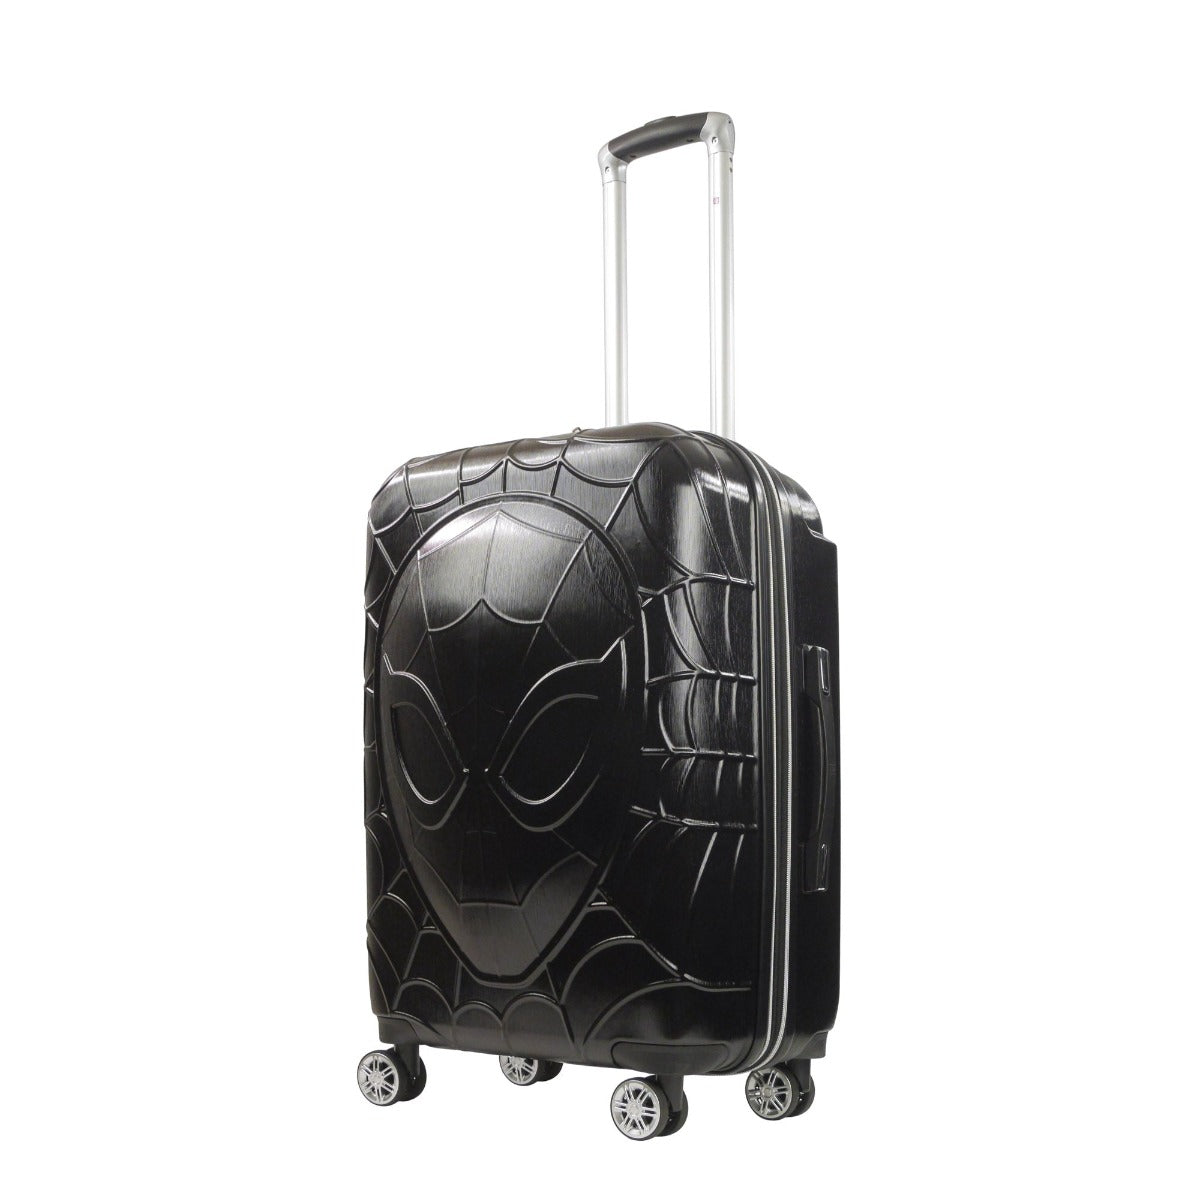 Marvel Spiderman 25" check-in hard-sided spinner suitcase luggage in black